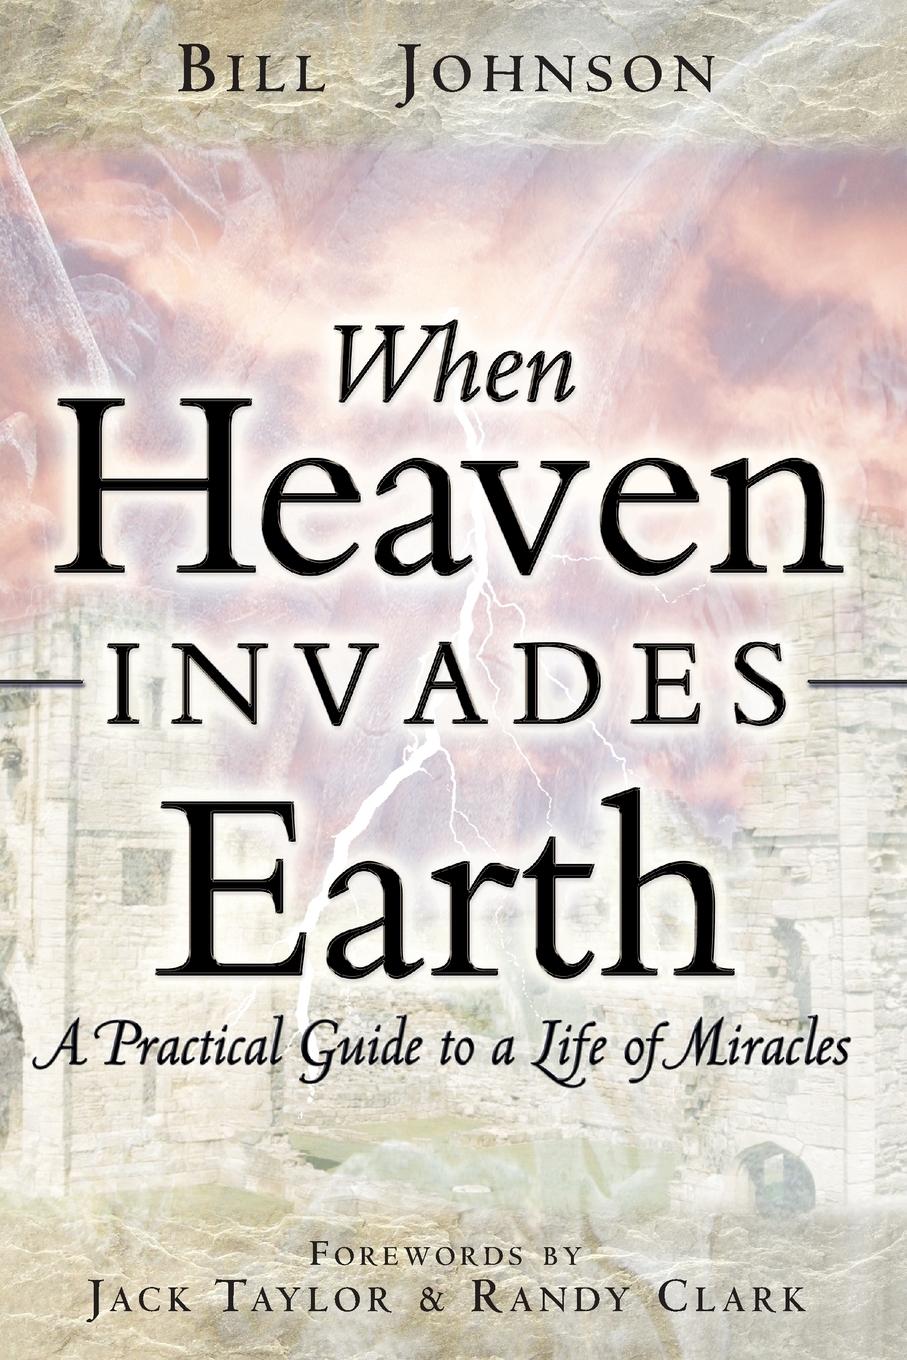 When Heaven Invades Earth / A Practical Guide to a Life of Miracles / Bill Johnson / Taschenbuch / Paperback / Englisch / 2005 / Destiny Image / EAN 9780768429527 - Johnson, Bill